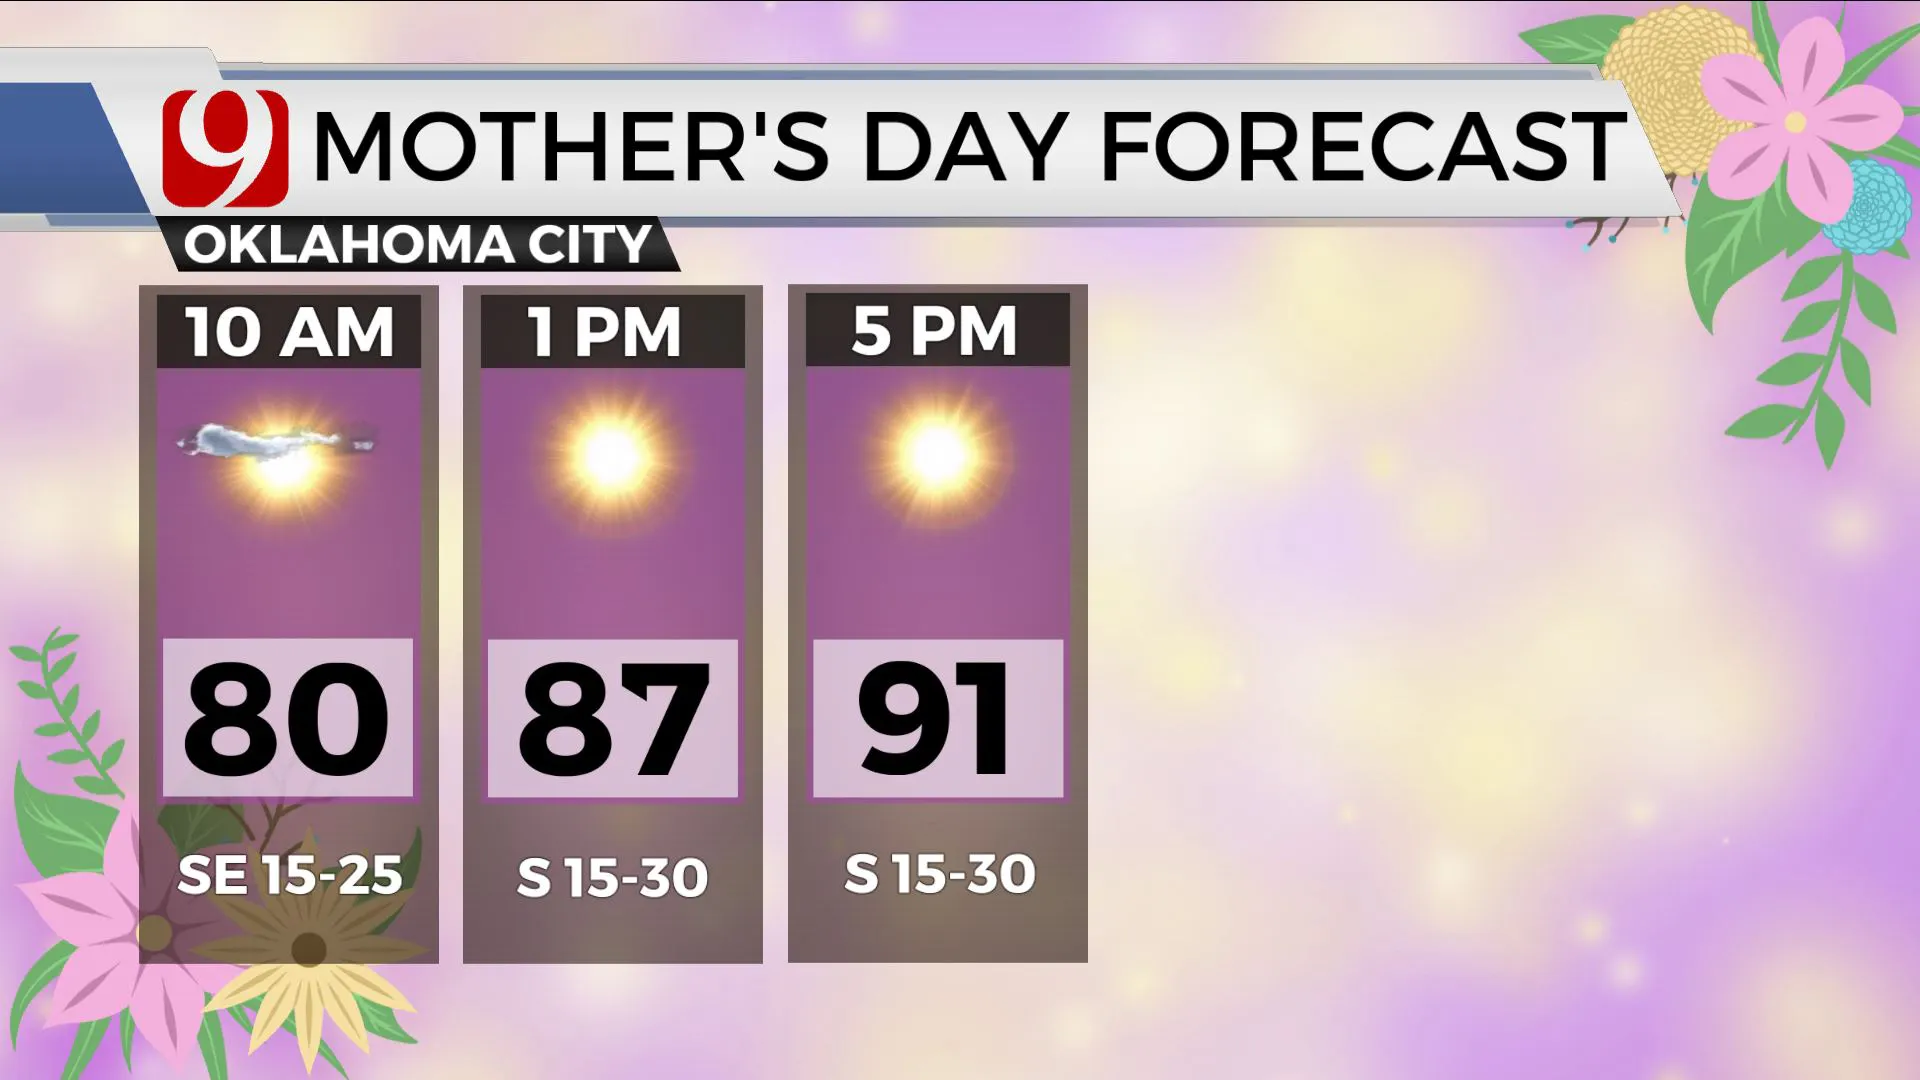 MOTHER'S DAY FORECAST